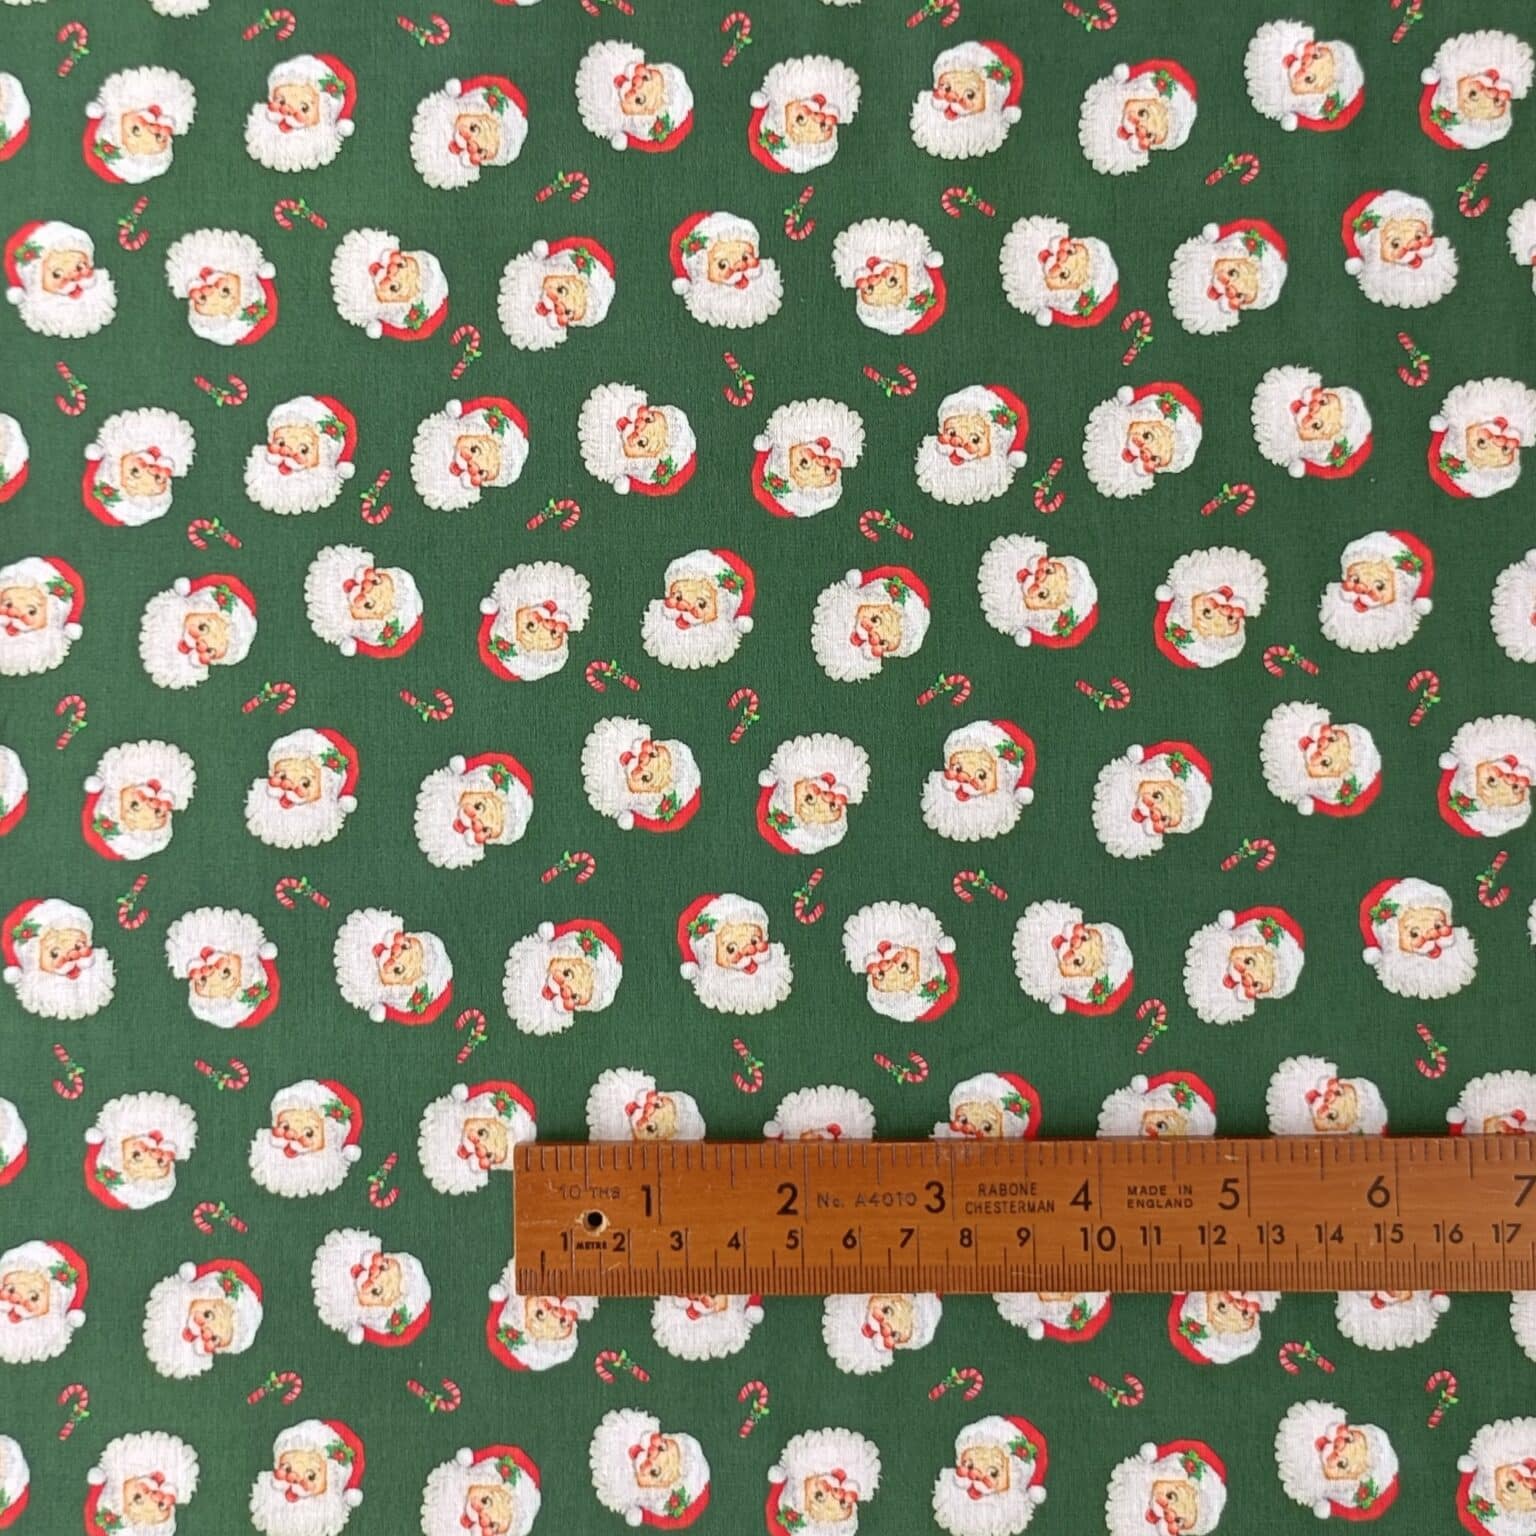 Cotton Fabric - Christmas Santa & Candy Canes - 150cm Wide